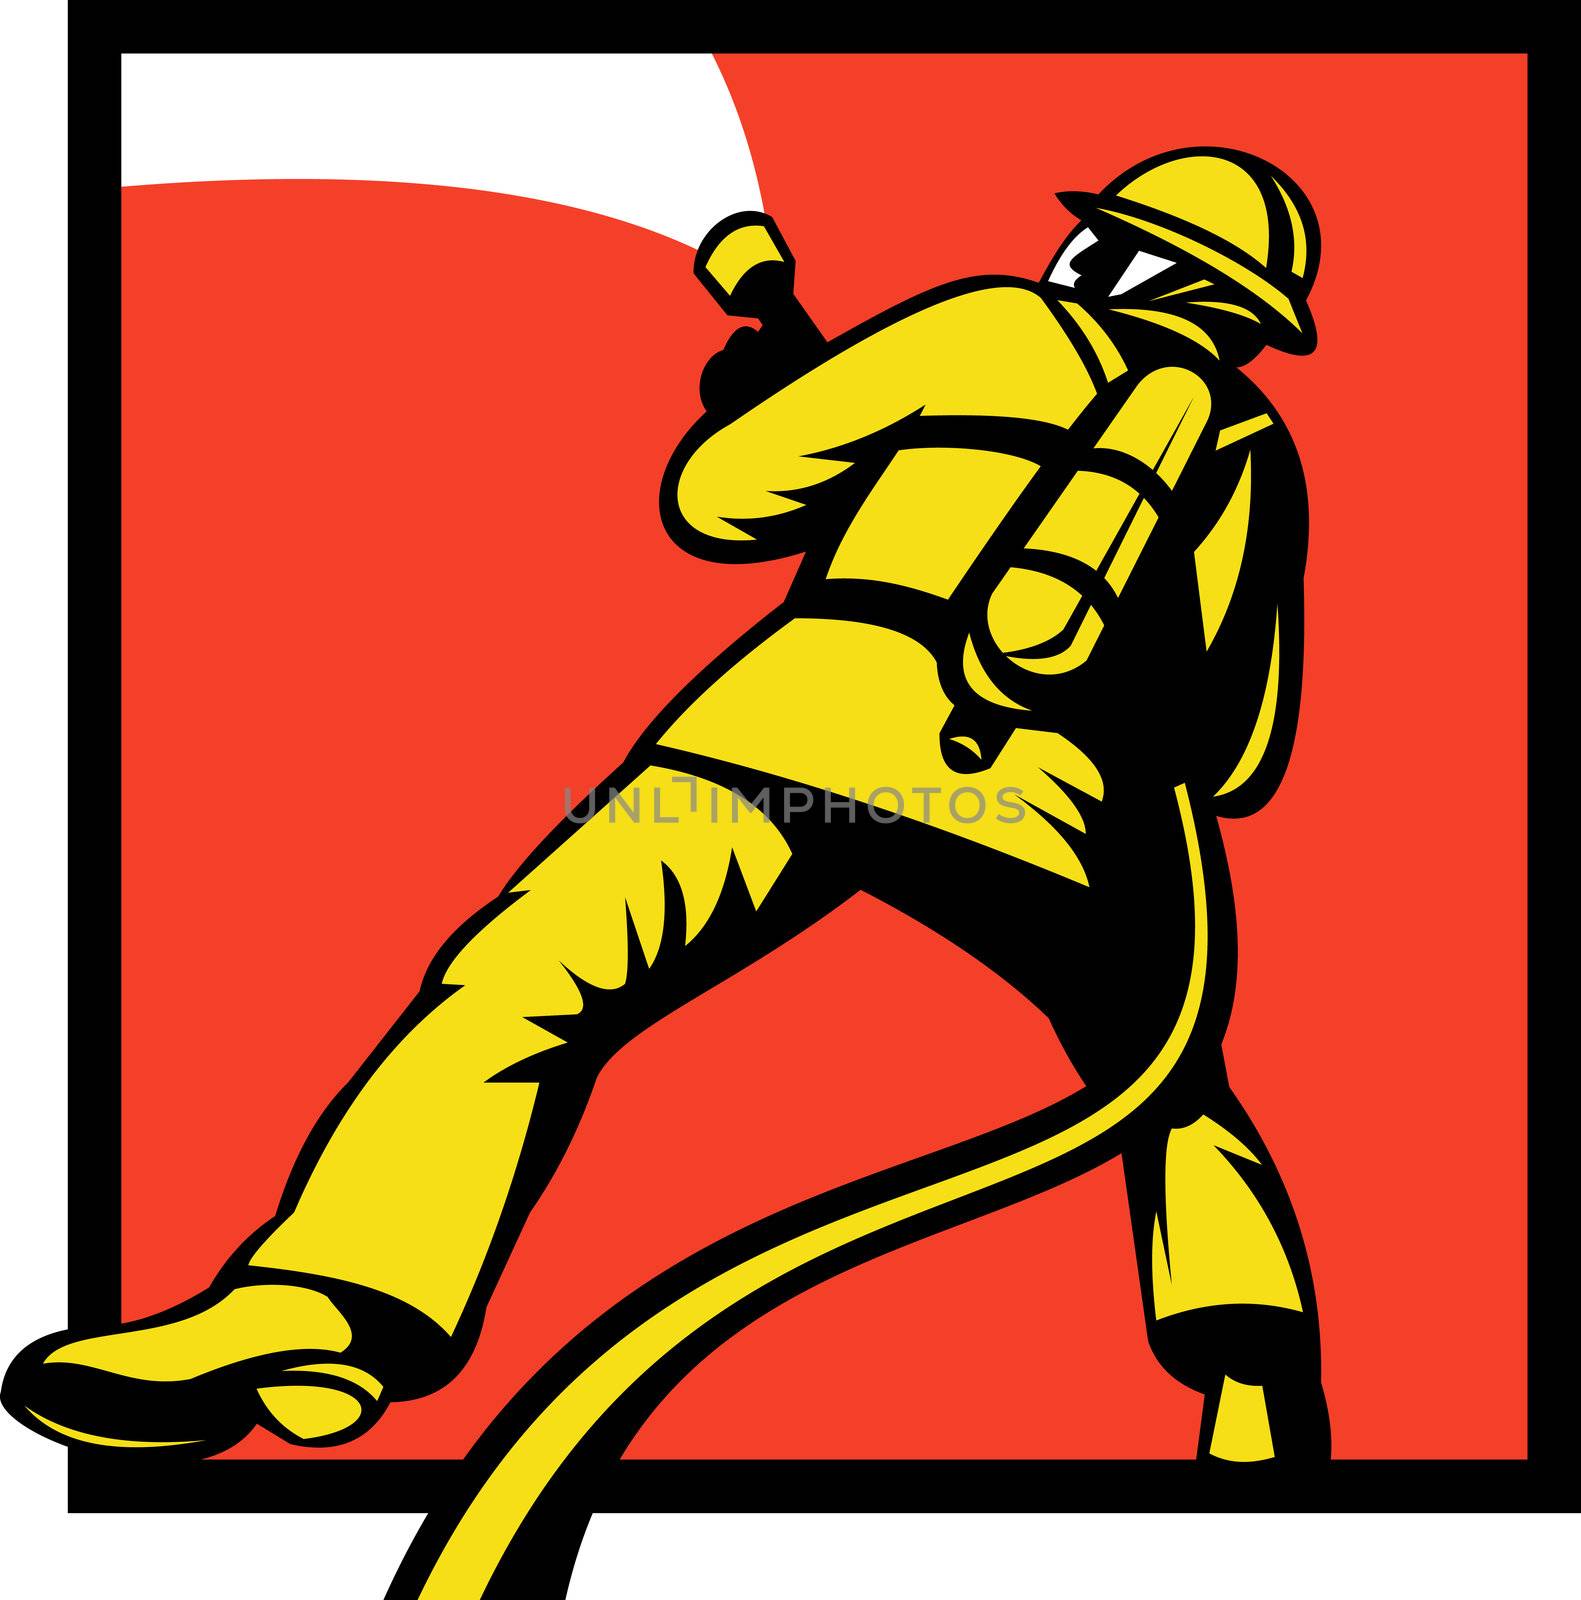 Firefighter or fireman aiming a fire hose  by patrimonio